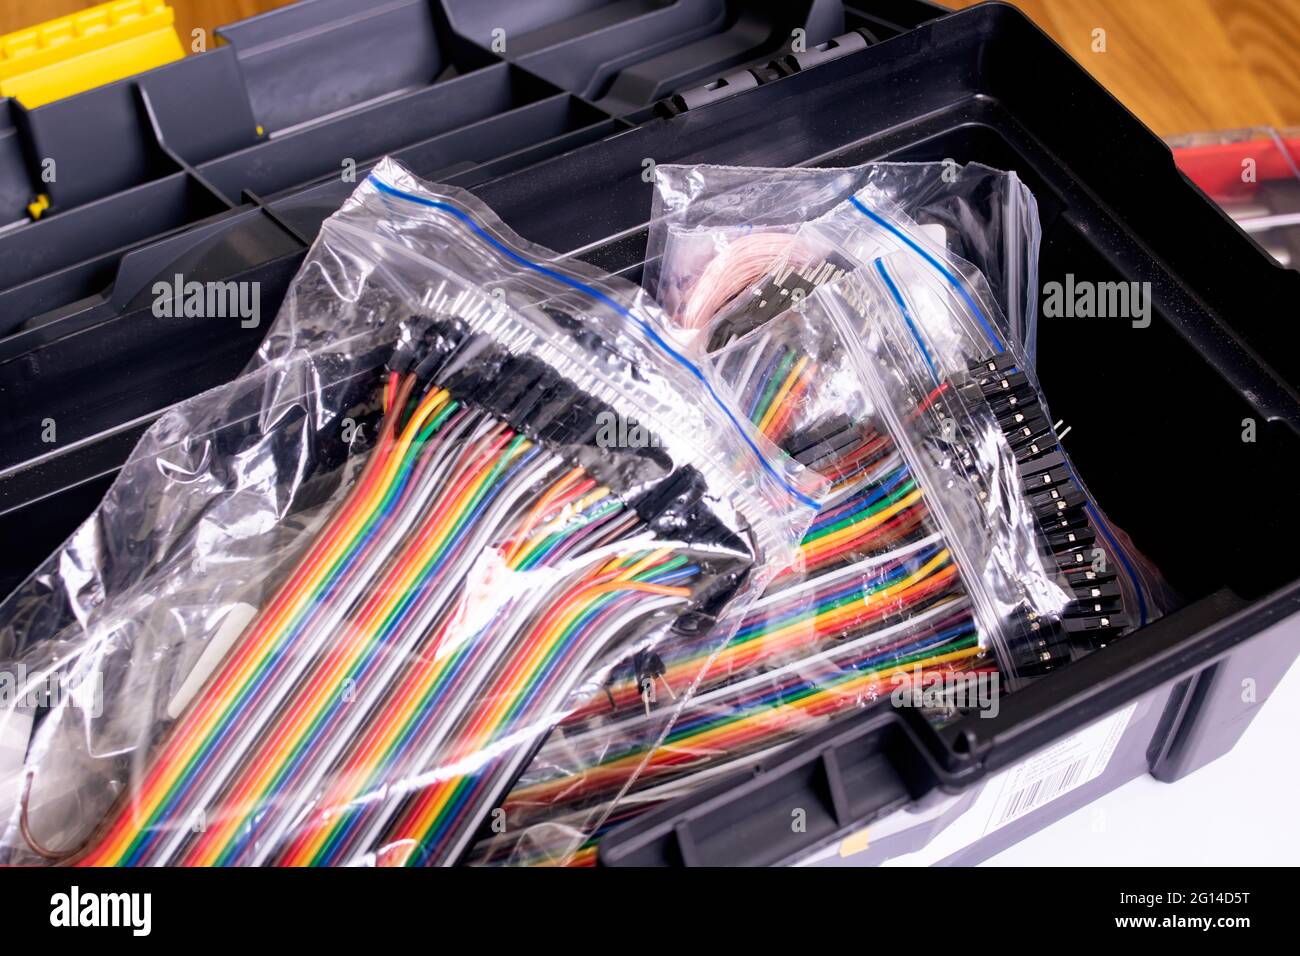 Colored wires in bags in a box close up Stock Photo